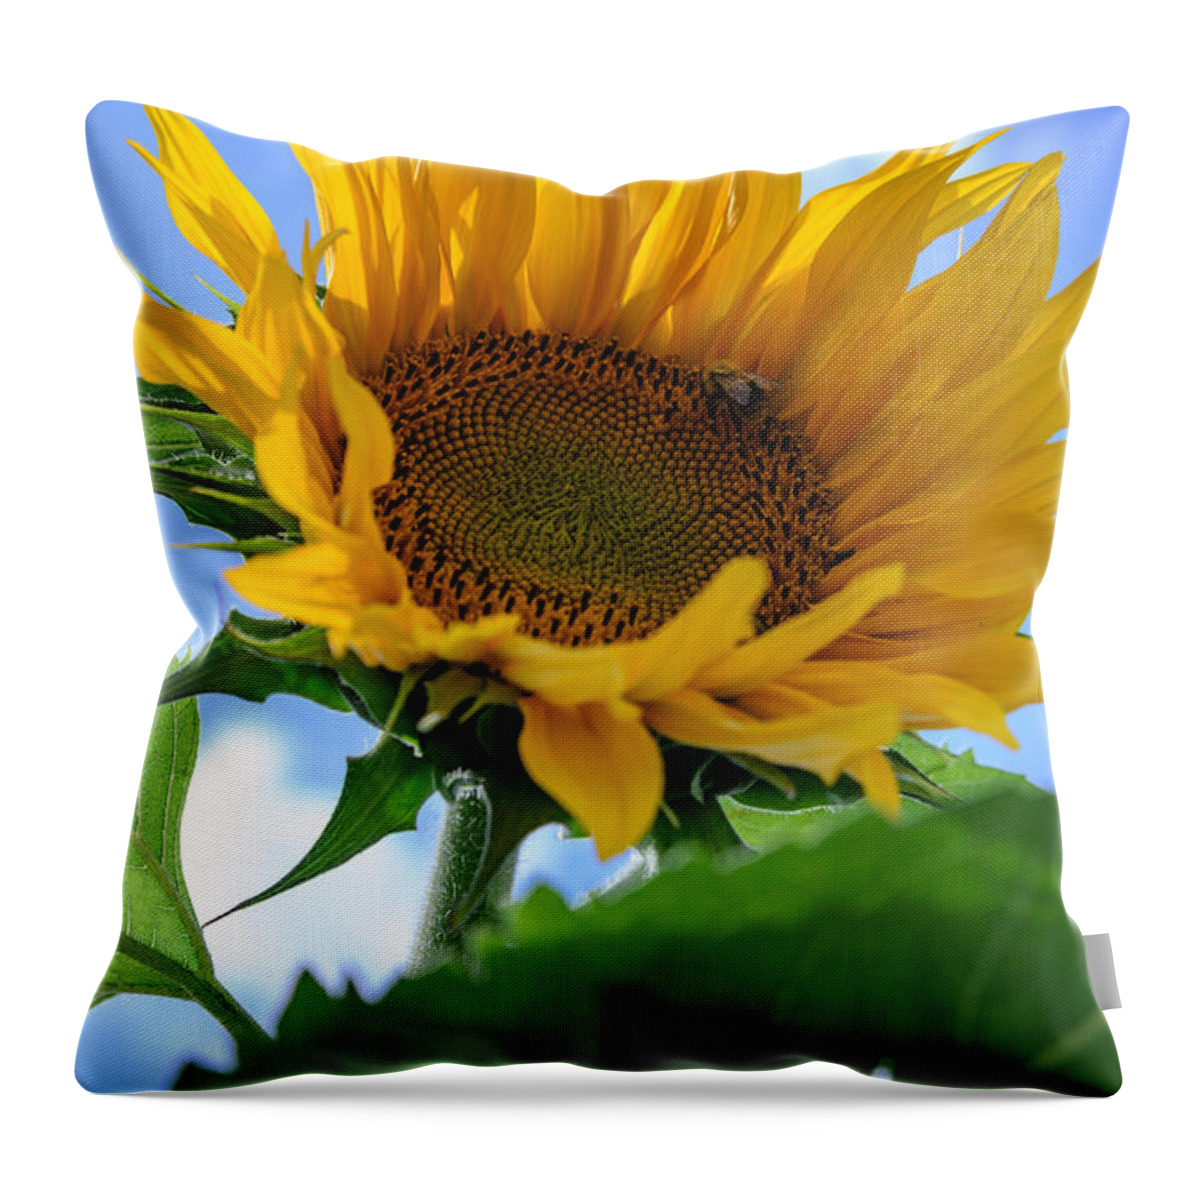 Orange Throw Pillow featuring the photograph Sunflower #3 by Michael Goyberg